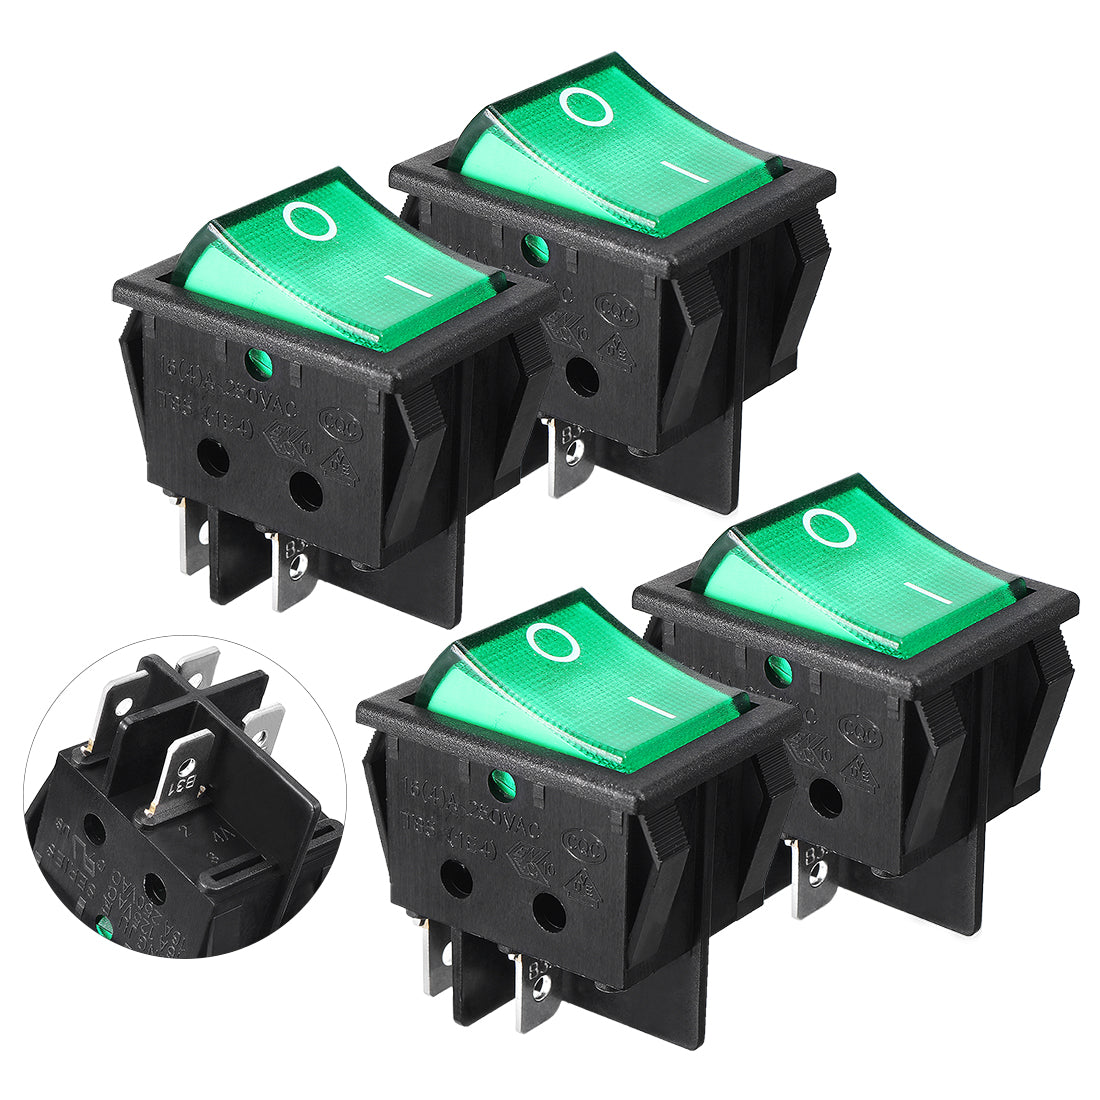 uxcell Uxcell Mini 4P DPST Snap in Plastic Car Rocker Switch w Green Lamp 4PCS